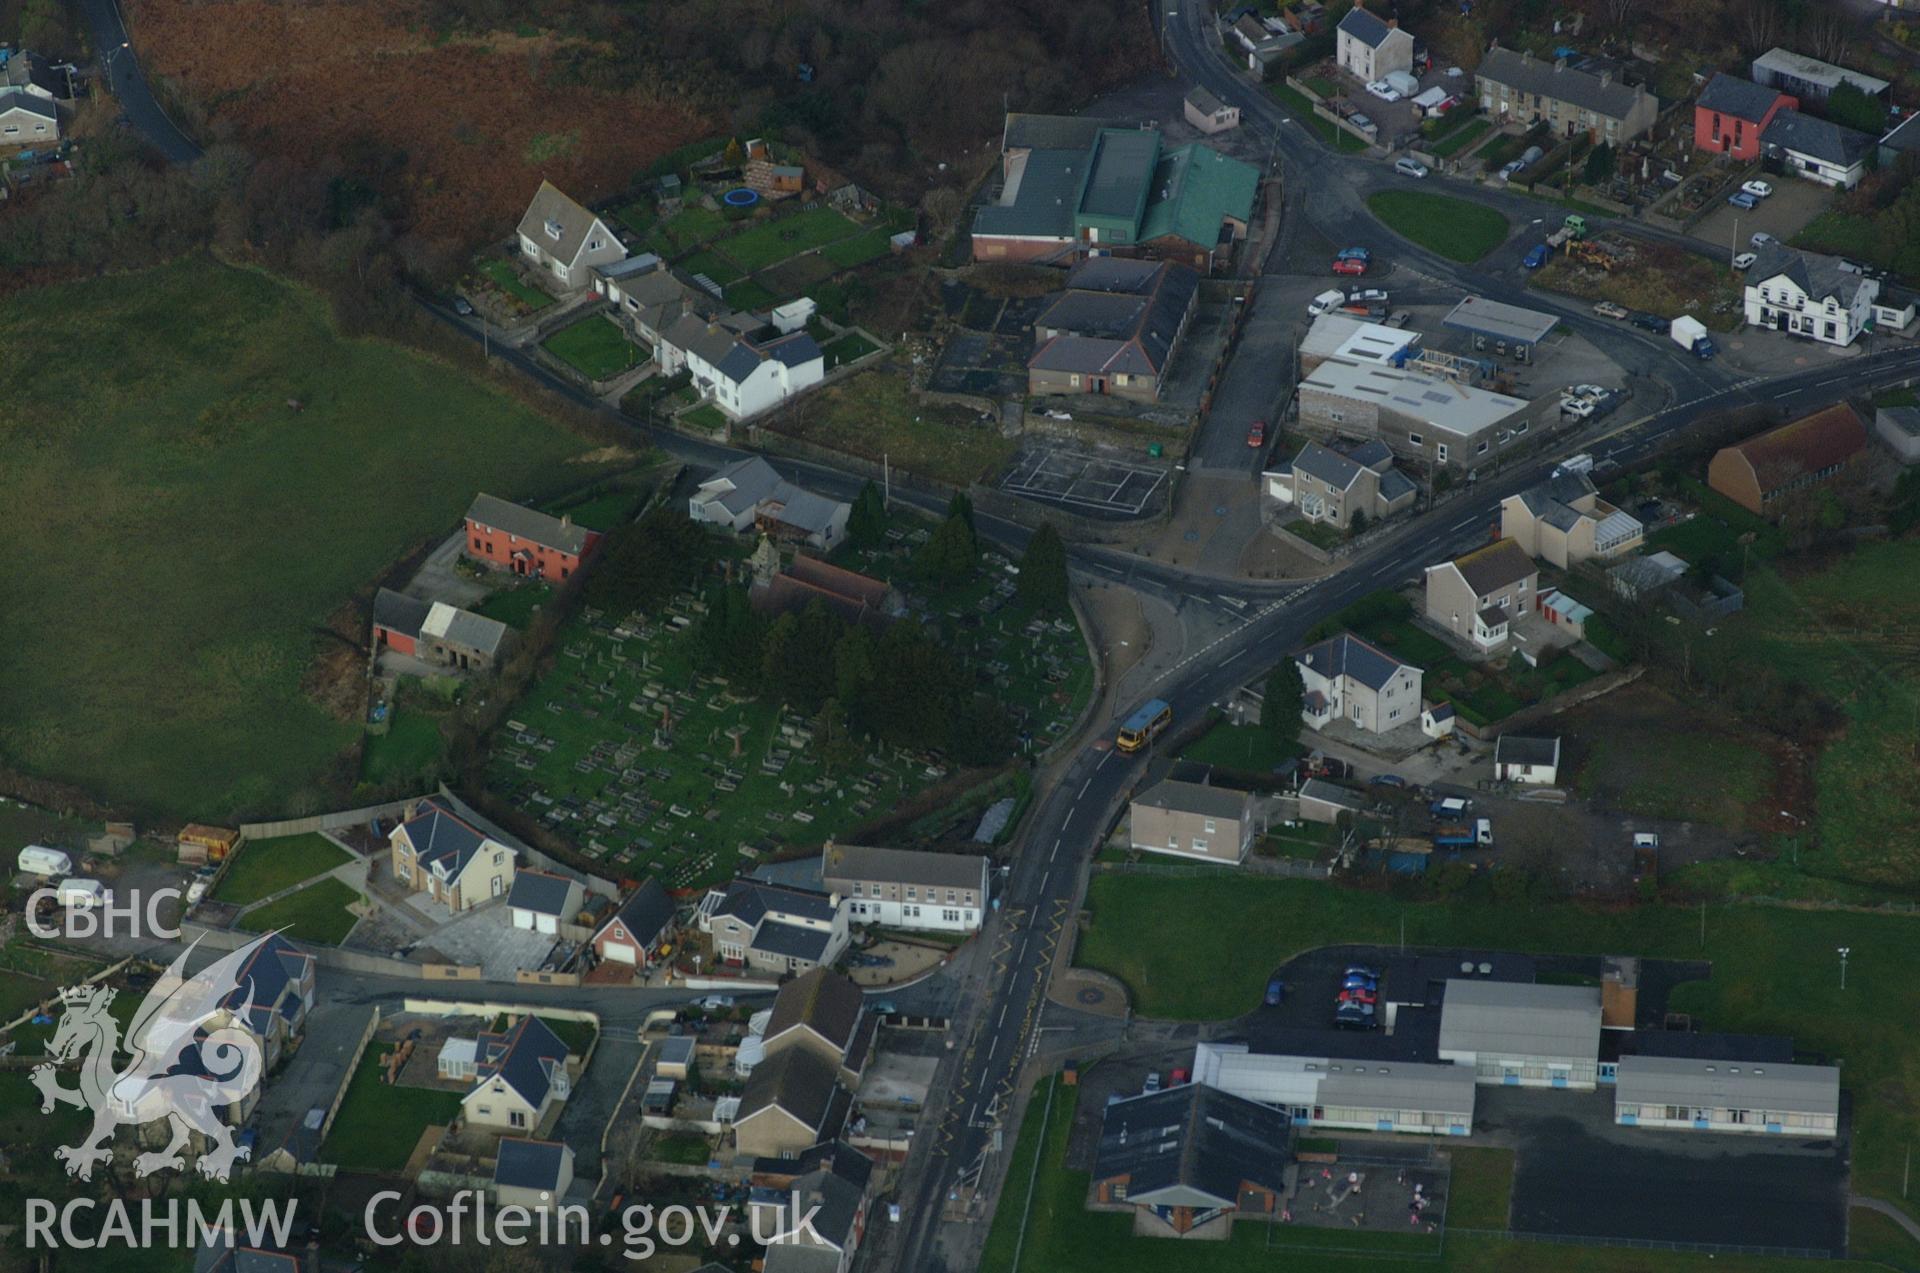 RCAHMW colour oblique aerial photograph of Bettws taken on 13/01/2005 by Toby Driver